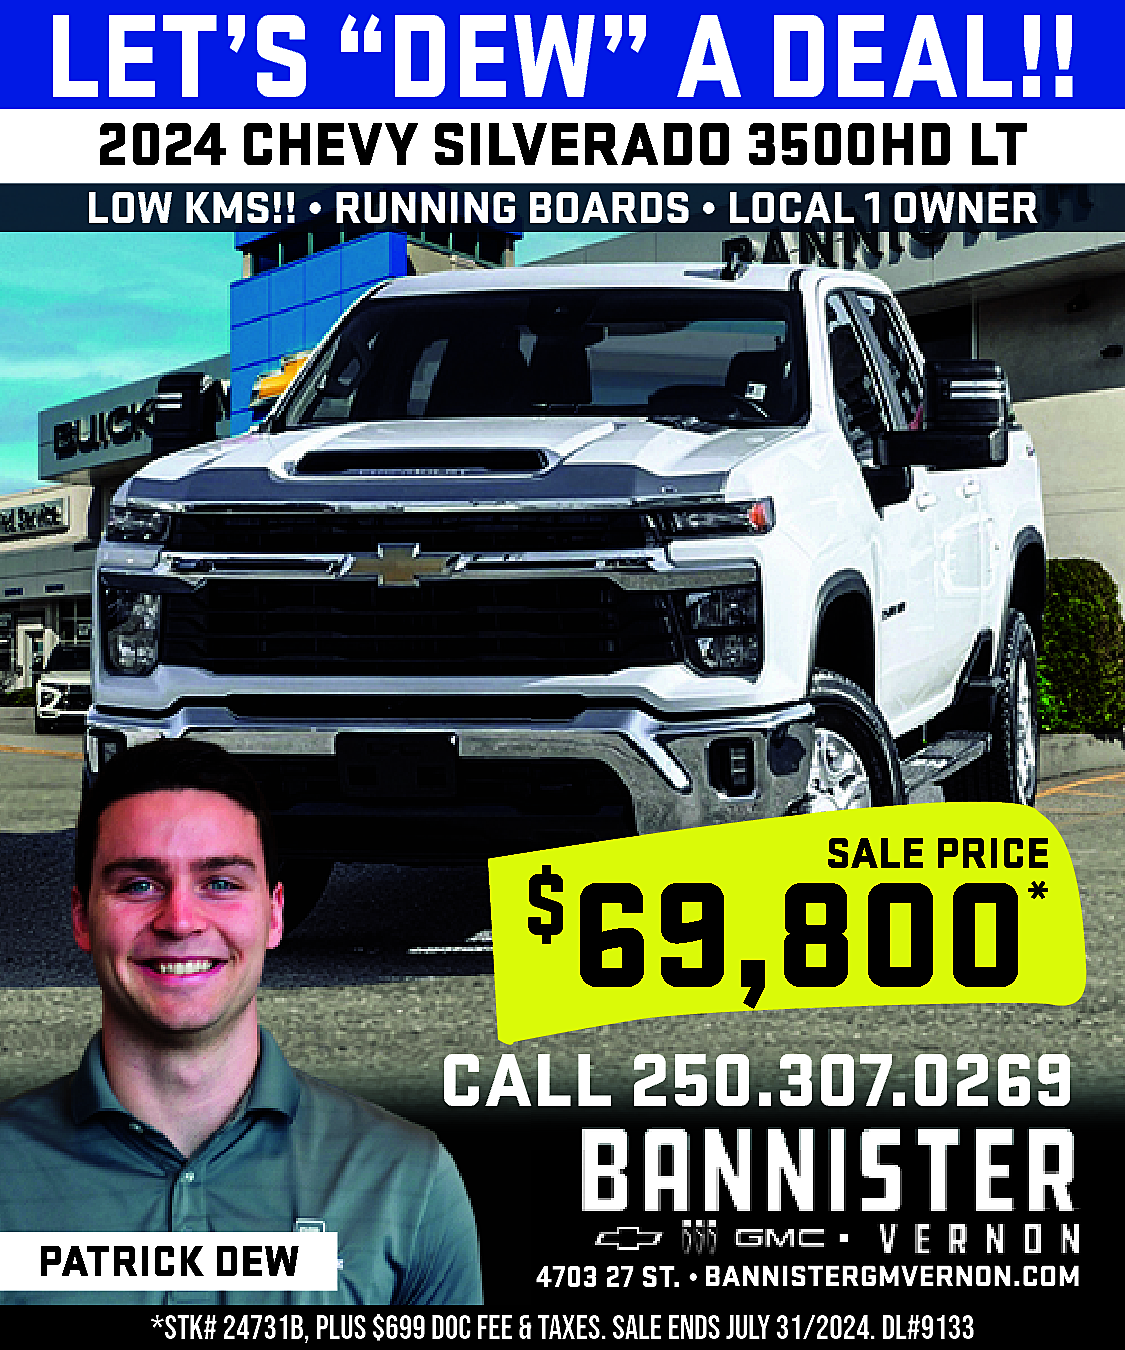 LET’S “DEW” A DEAL!! <br>2024  LET’S “DEW” A DEAL!!  2024 CHEVY SILVERADO 3500HD LT    LOW KMS!! • RUNNING BOARDS • LOCAL 1 OWNER    SALE PRICE    69,800    $    *    CALL 250.307.0269  PATRICK DEW    4703 27 ST. • https://www.bannistergmvernon.com/    *STK# 24731B, PLUS $699 DOC FEE & TAXES. SALE ENDS JULY 31/2024. DL#9133    